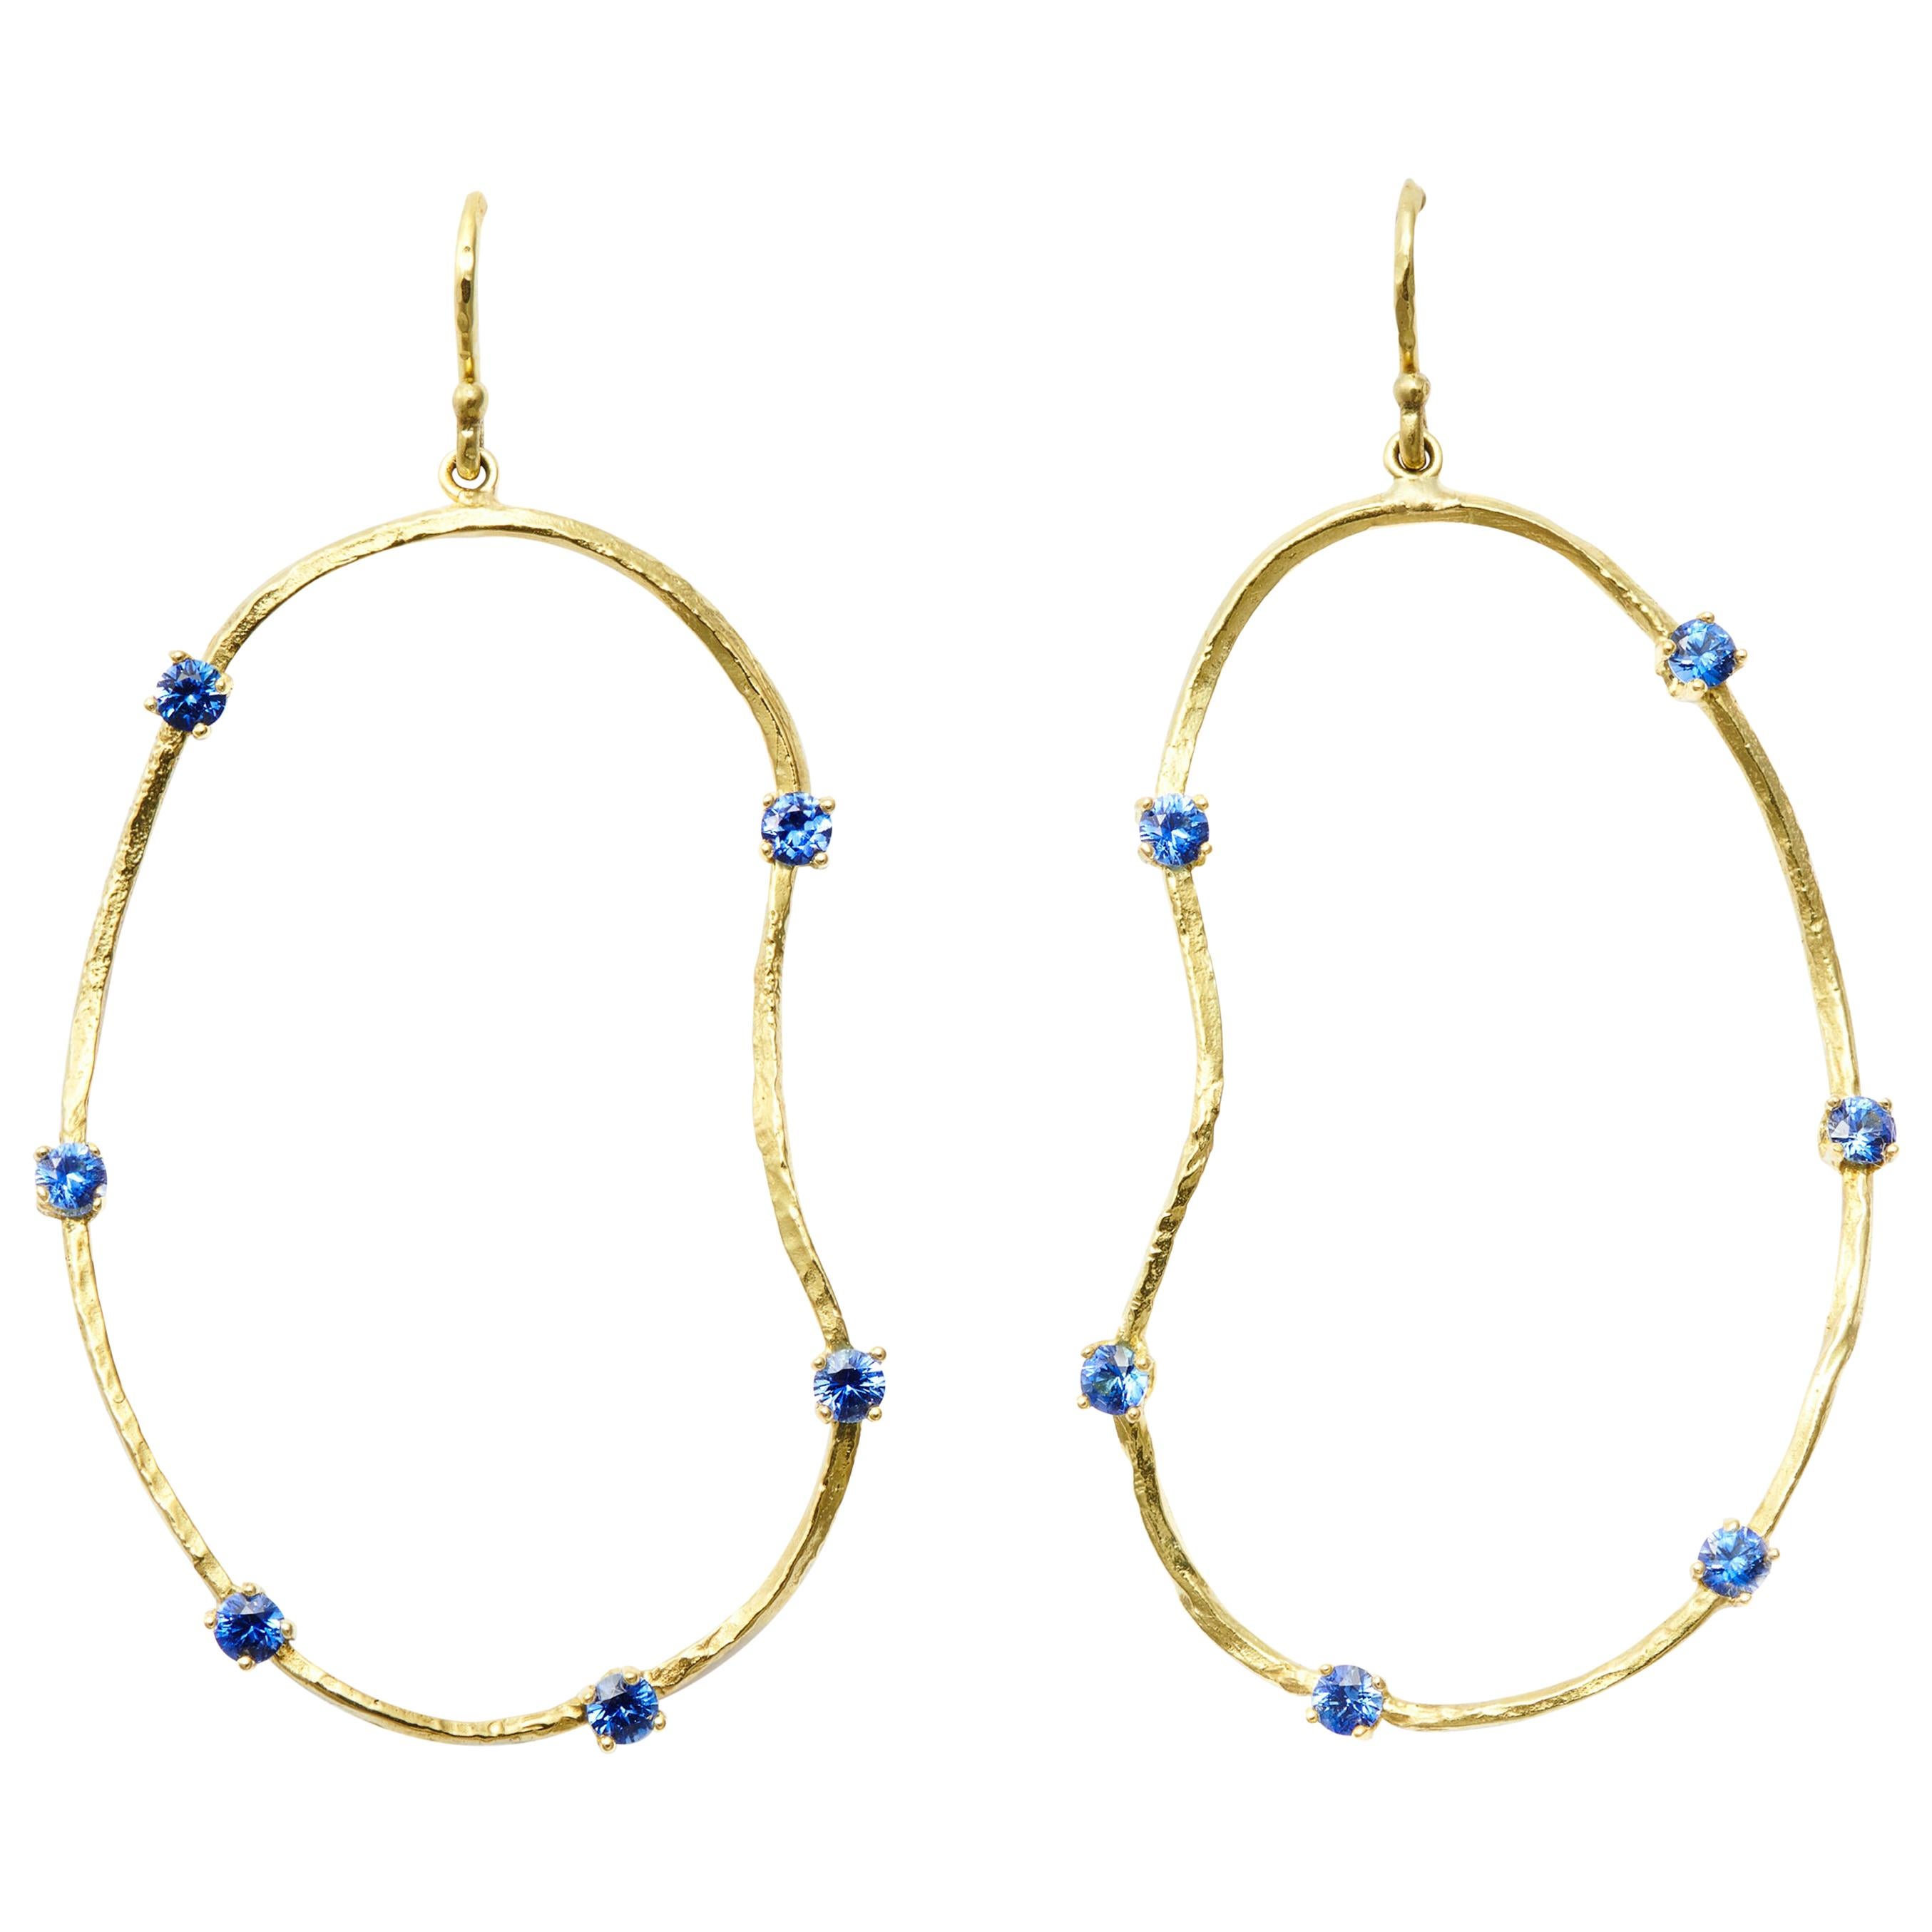 Susan Lister Locke Oyster Earrings with 0.35 Carat Sapphires in 18 Karat Gold For Sale